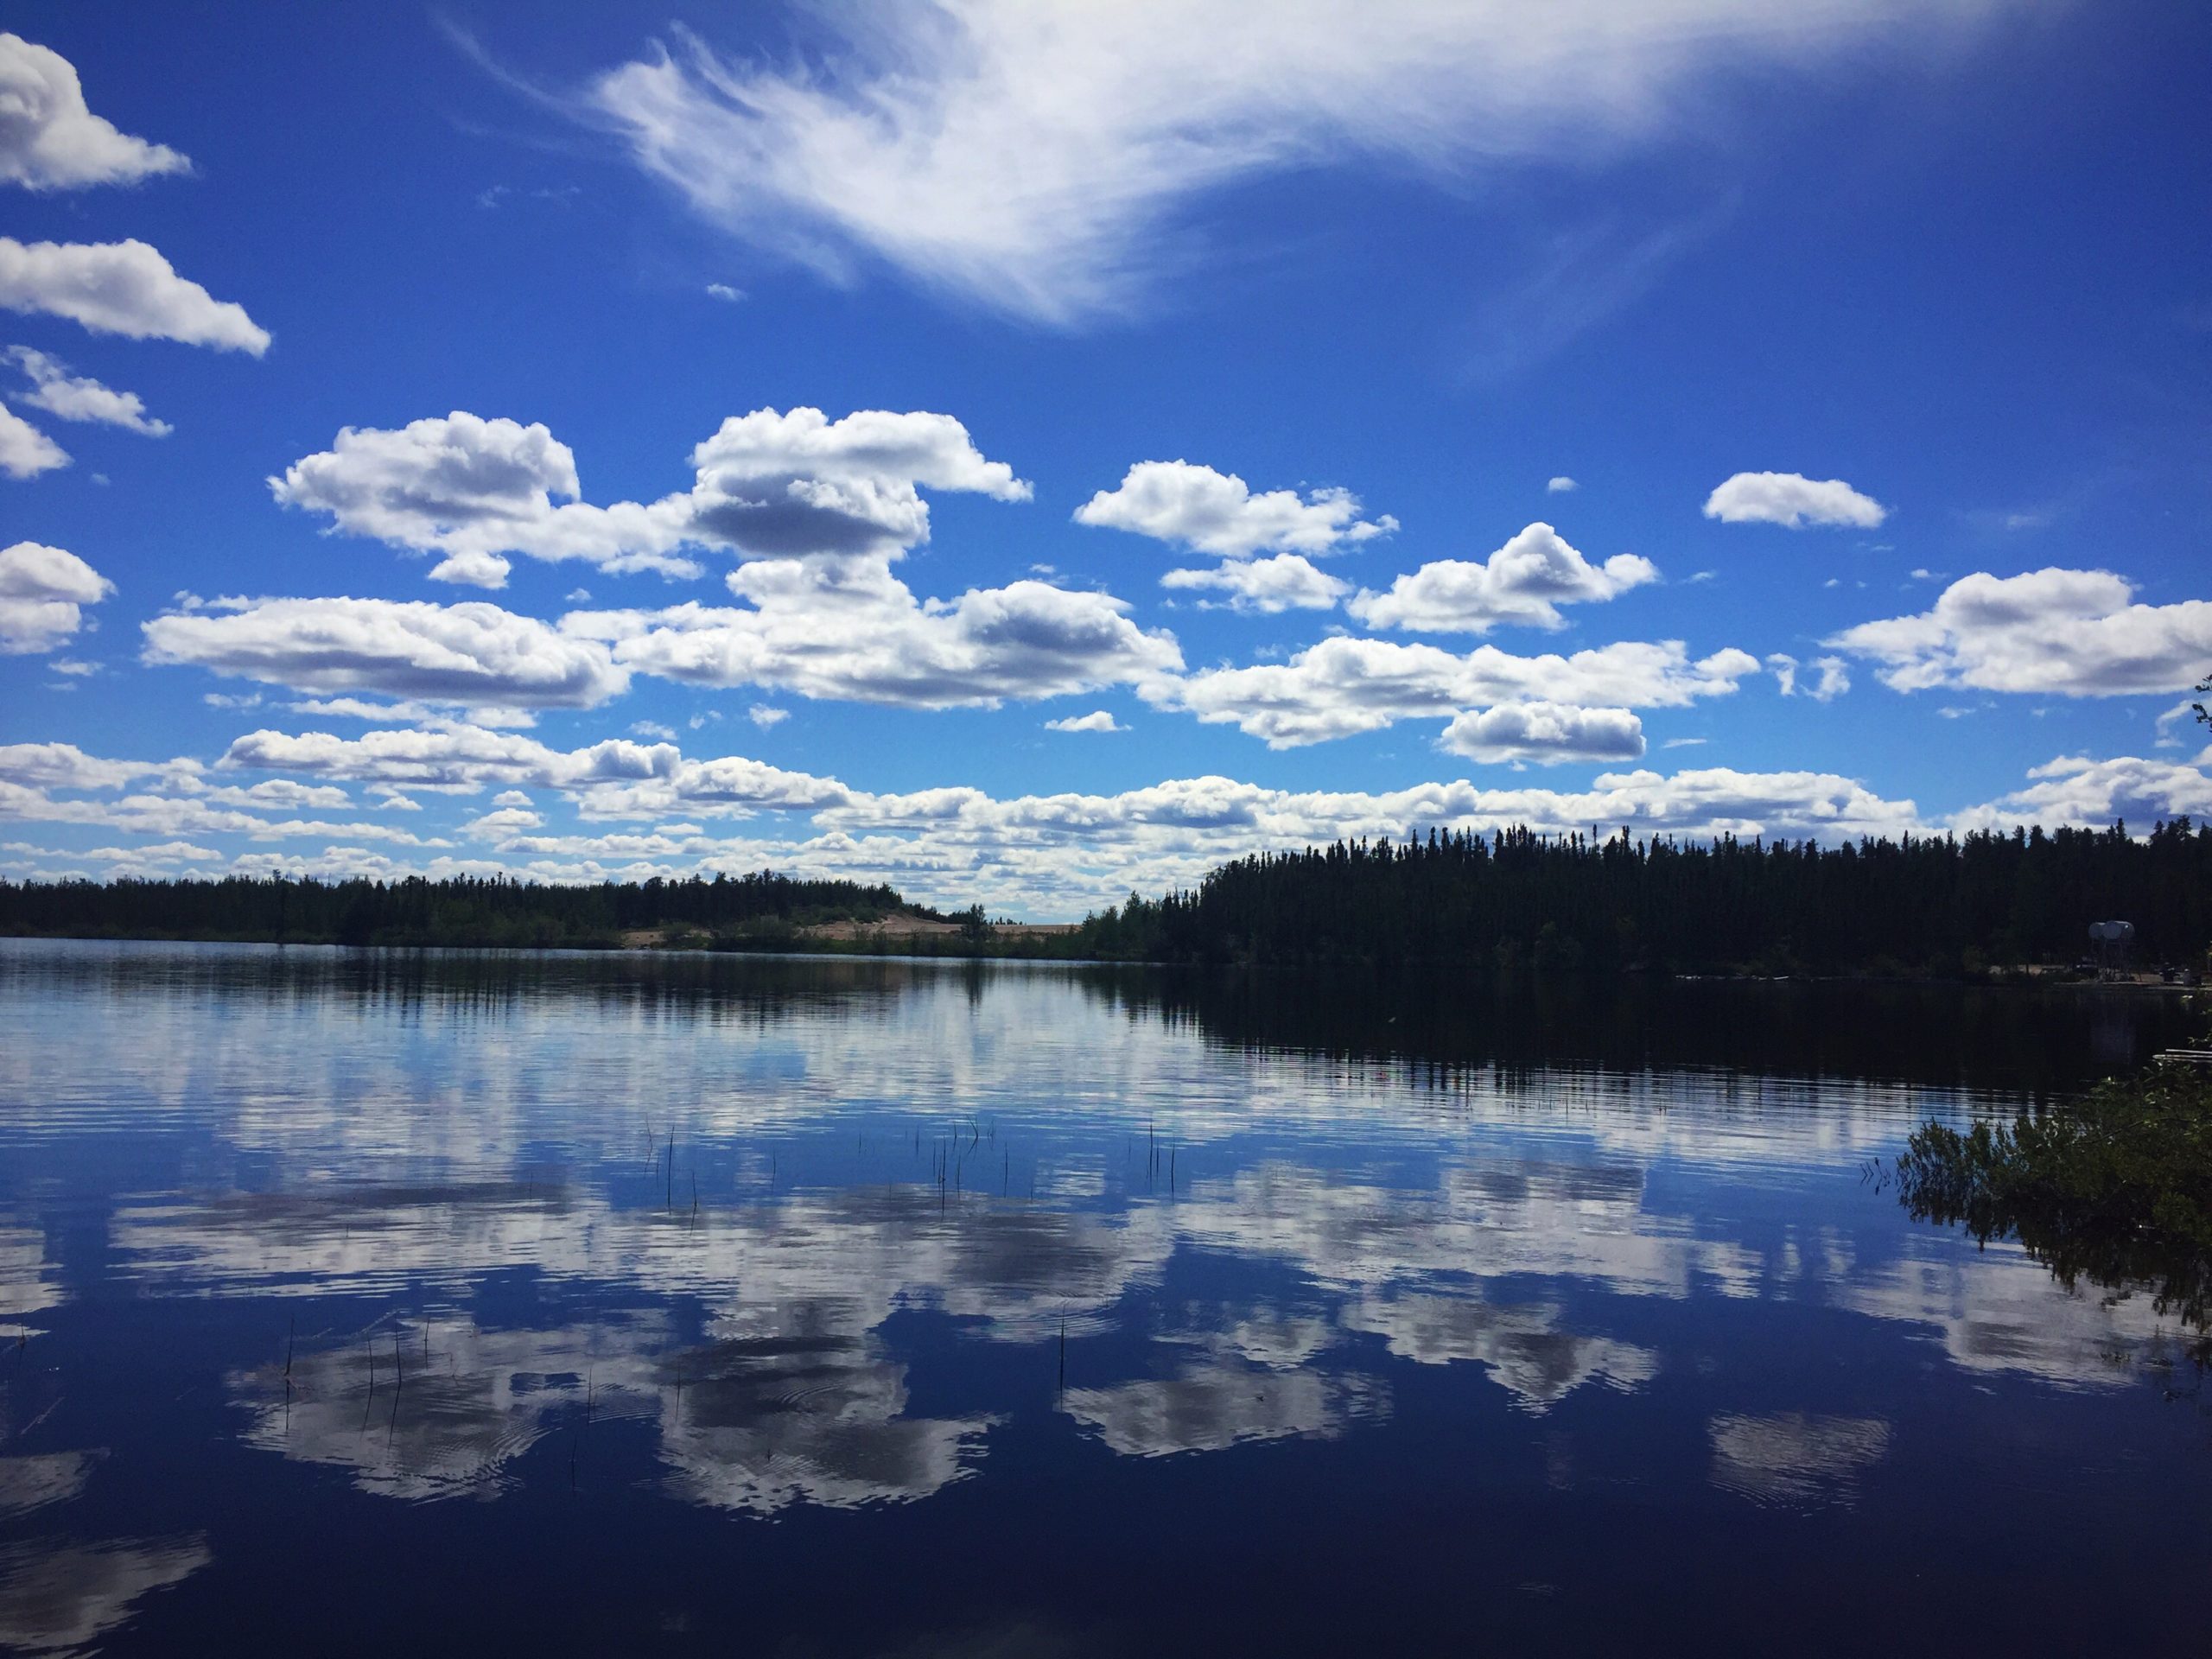 landscape of a tree lined lake and the blue skies with white fluffy clouds reflecting off the lake